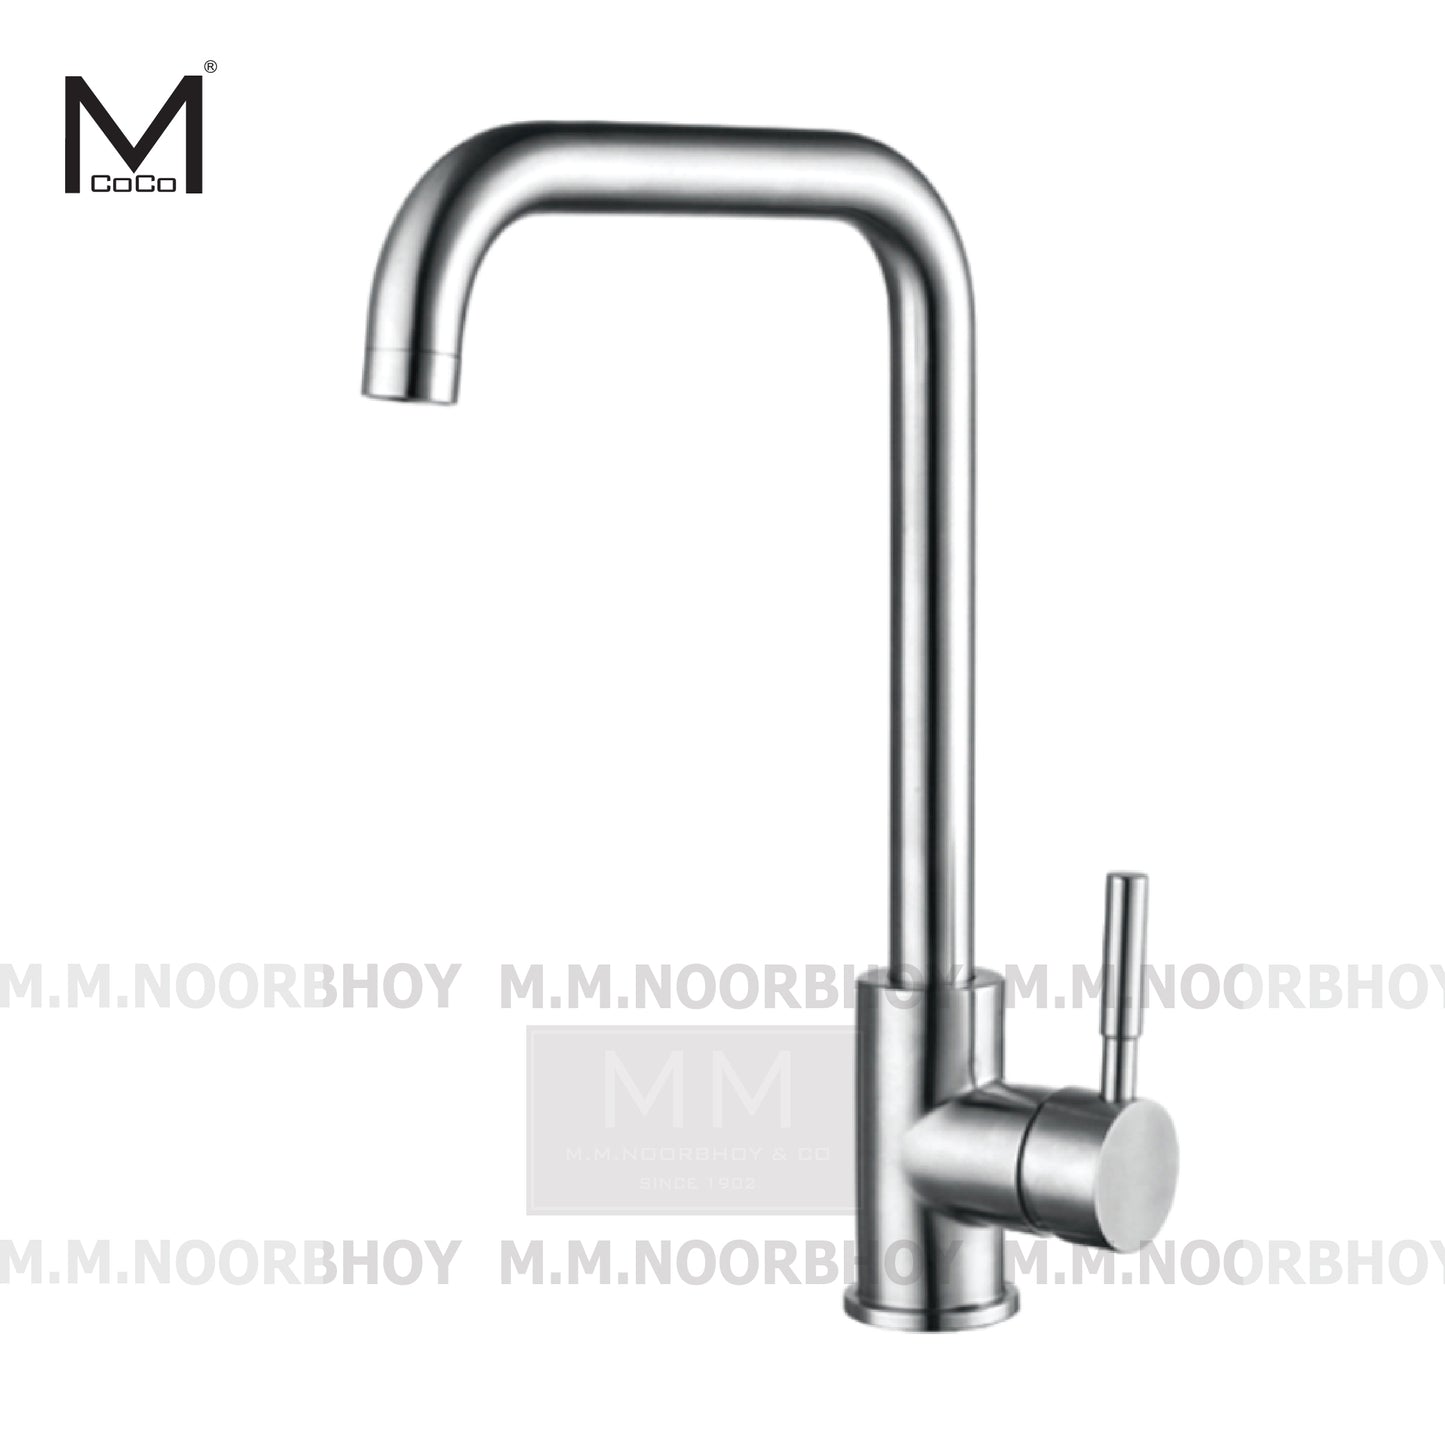 Mcoco Ss304 Kitchen Mixer Faucet Brushed Nickel 35.4x9x20cm Each - YT-4508MSS